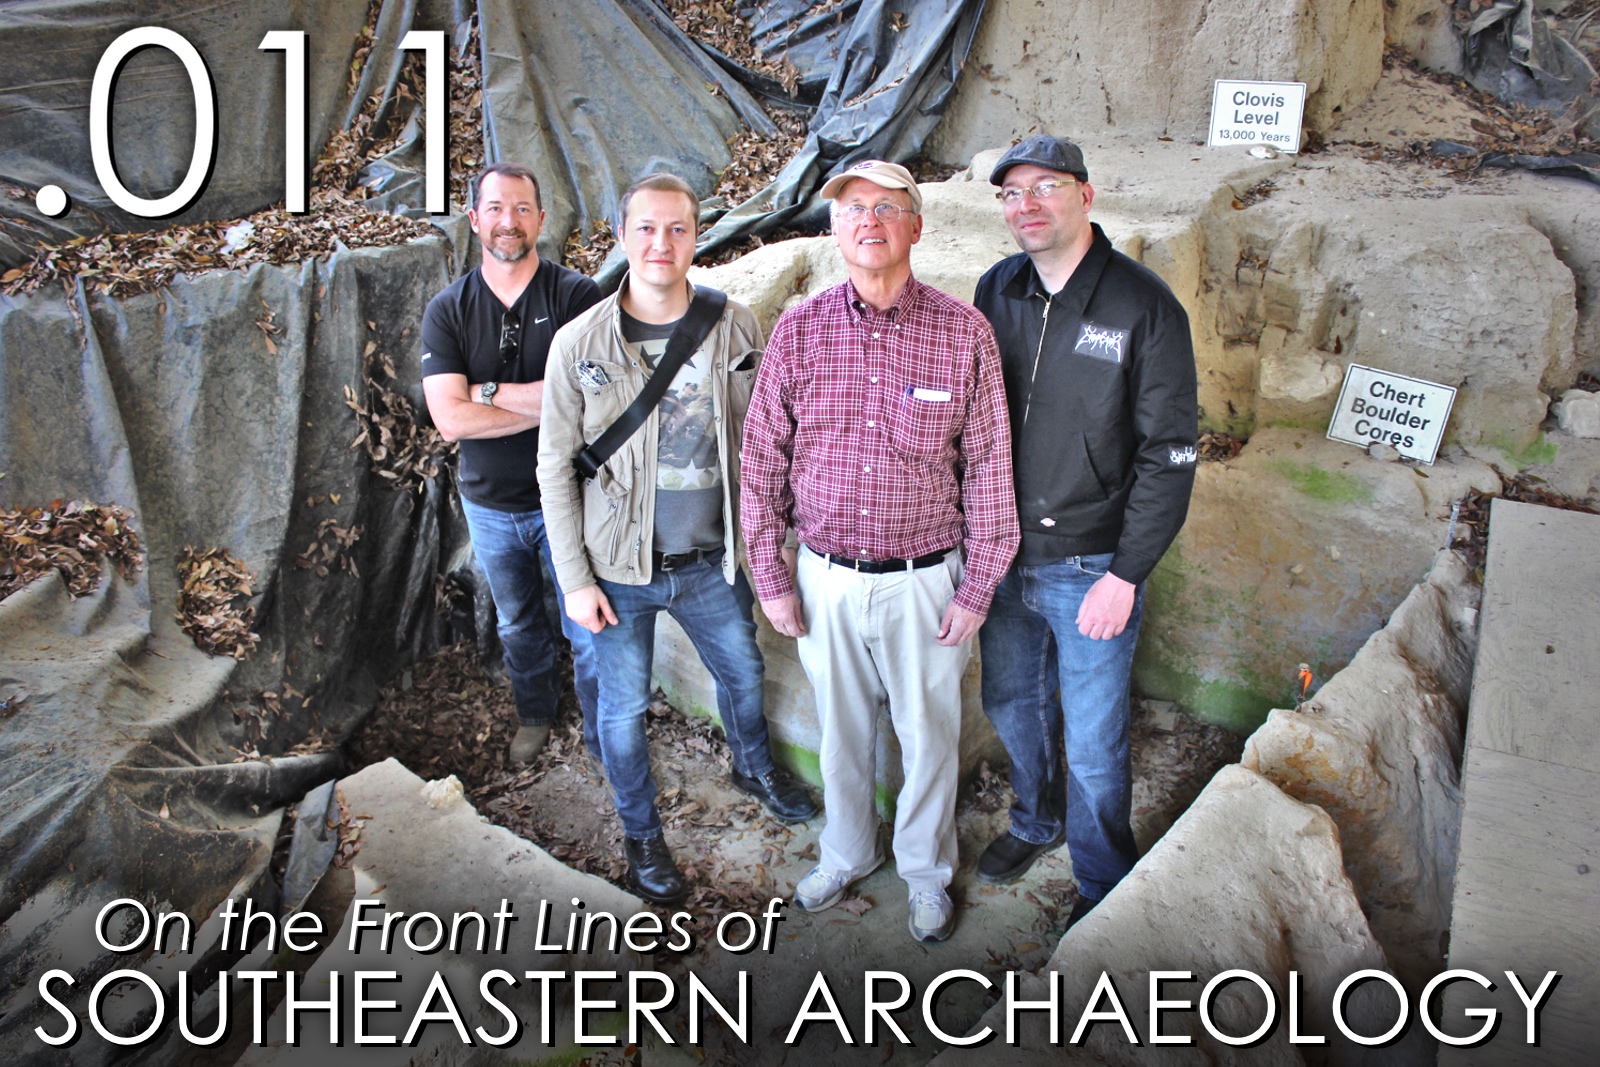 Southeastern Archaeology